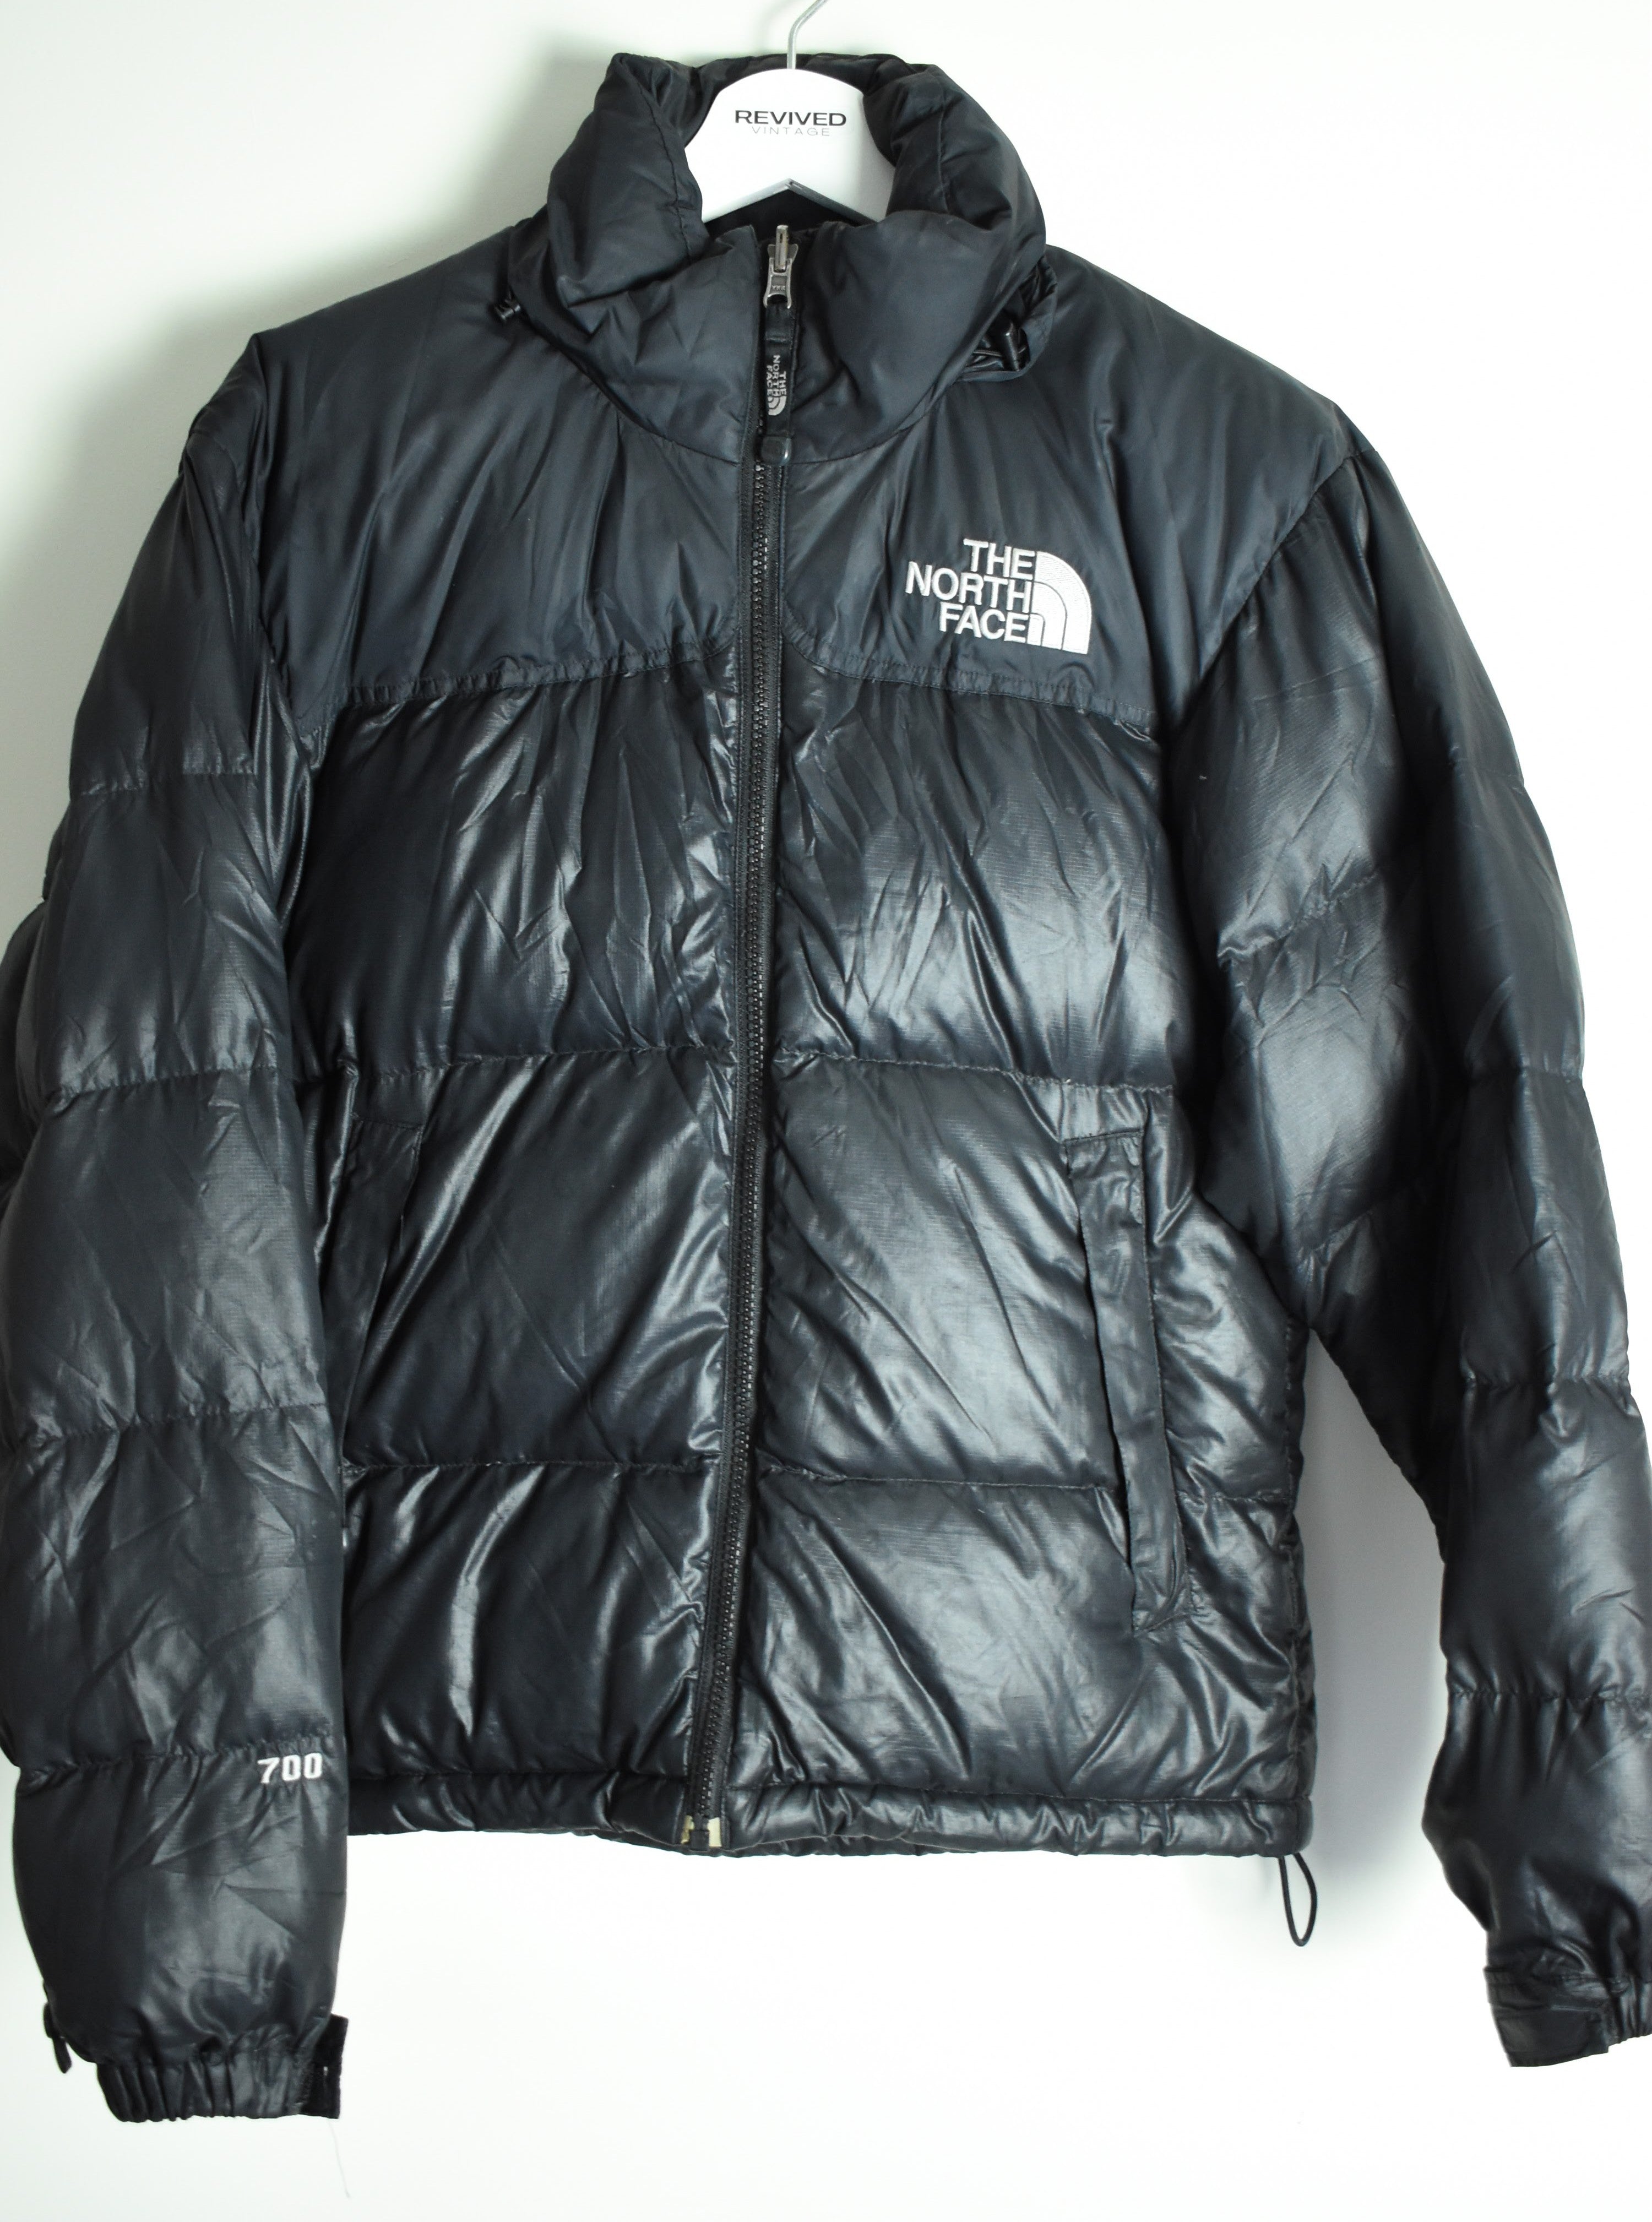 Vintage The North Face 700 Nuptse Puffer Black - Extra Small | Vintage Clothing